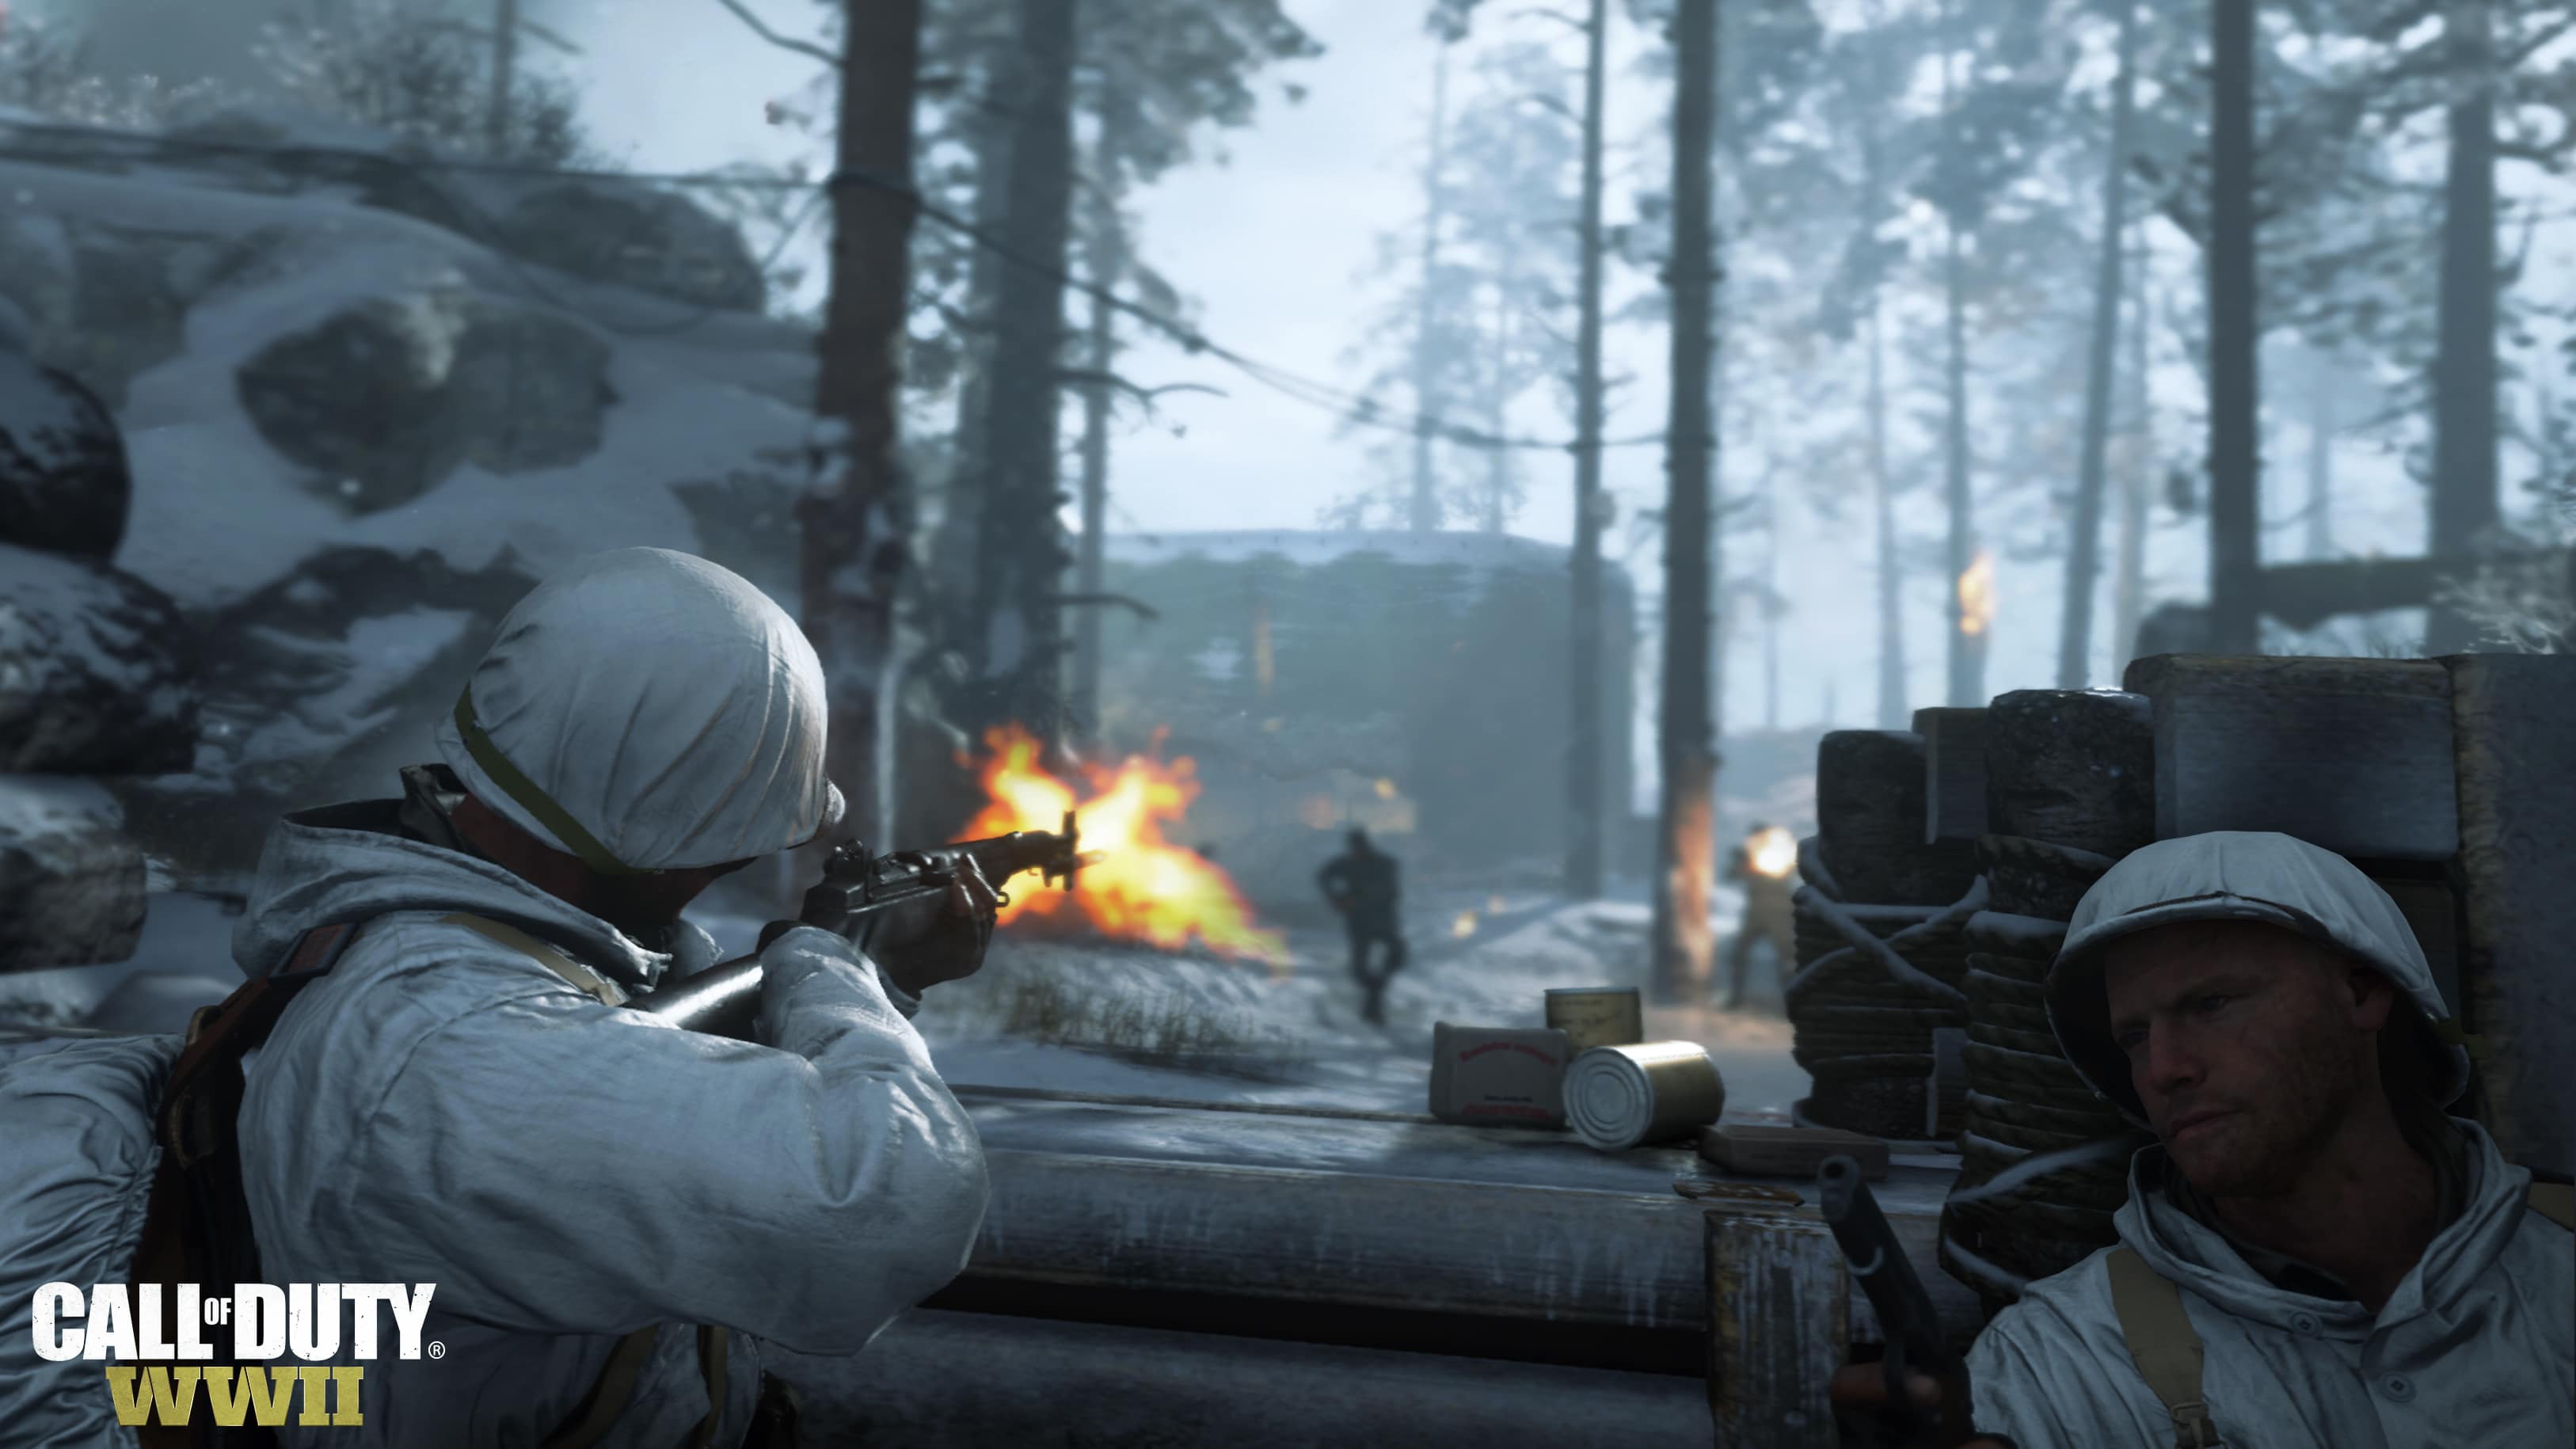 Screenshot of Call of Duty WW2 gameplay with soldiers and gunfire.Call of Duty WWII in-game action scene with soldiers and flame.